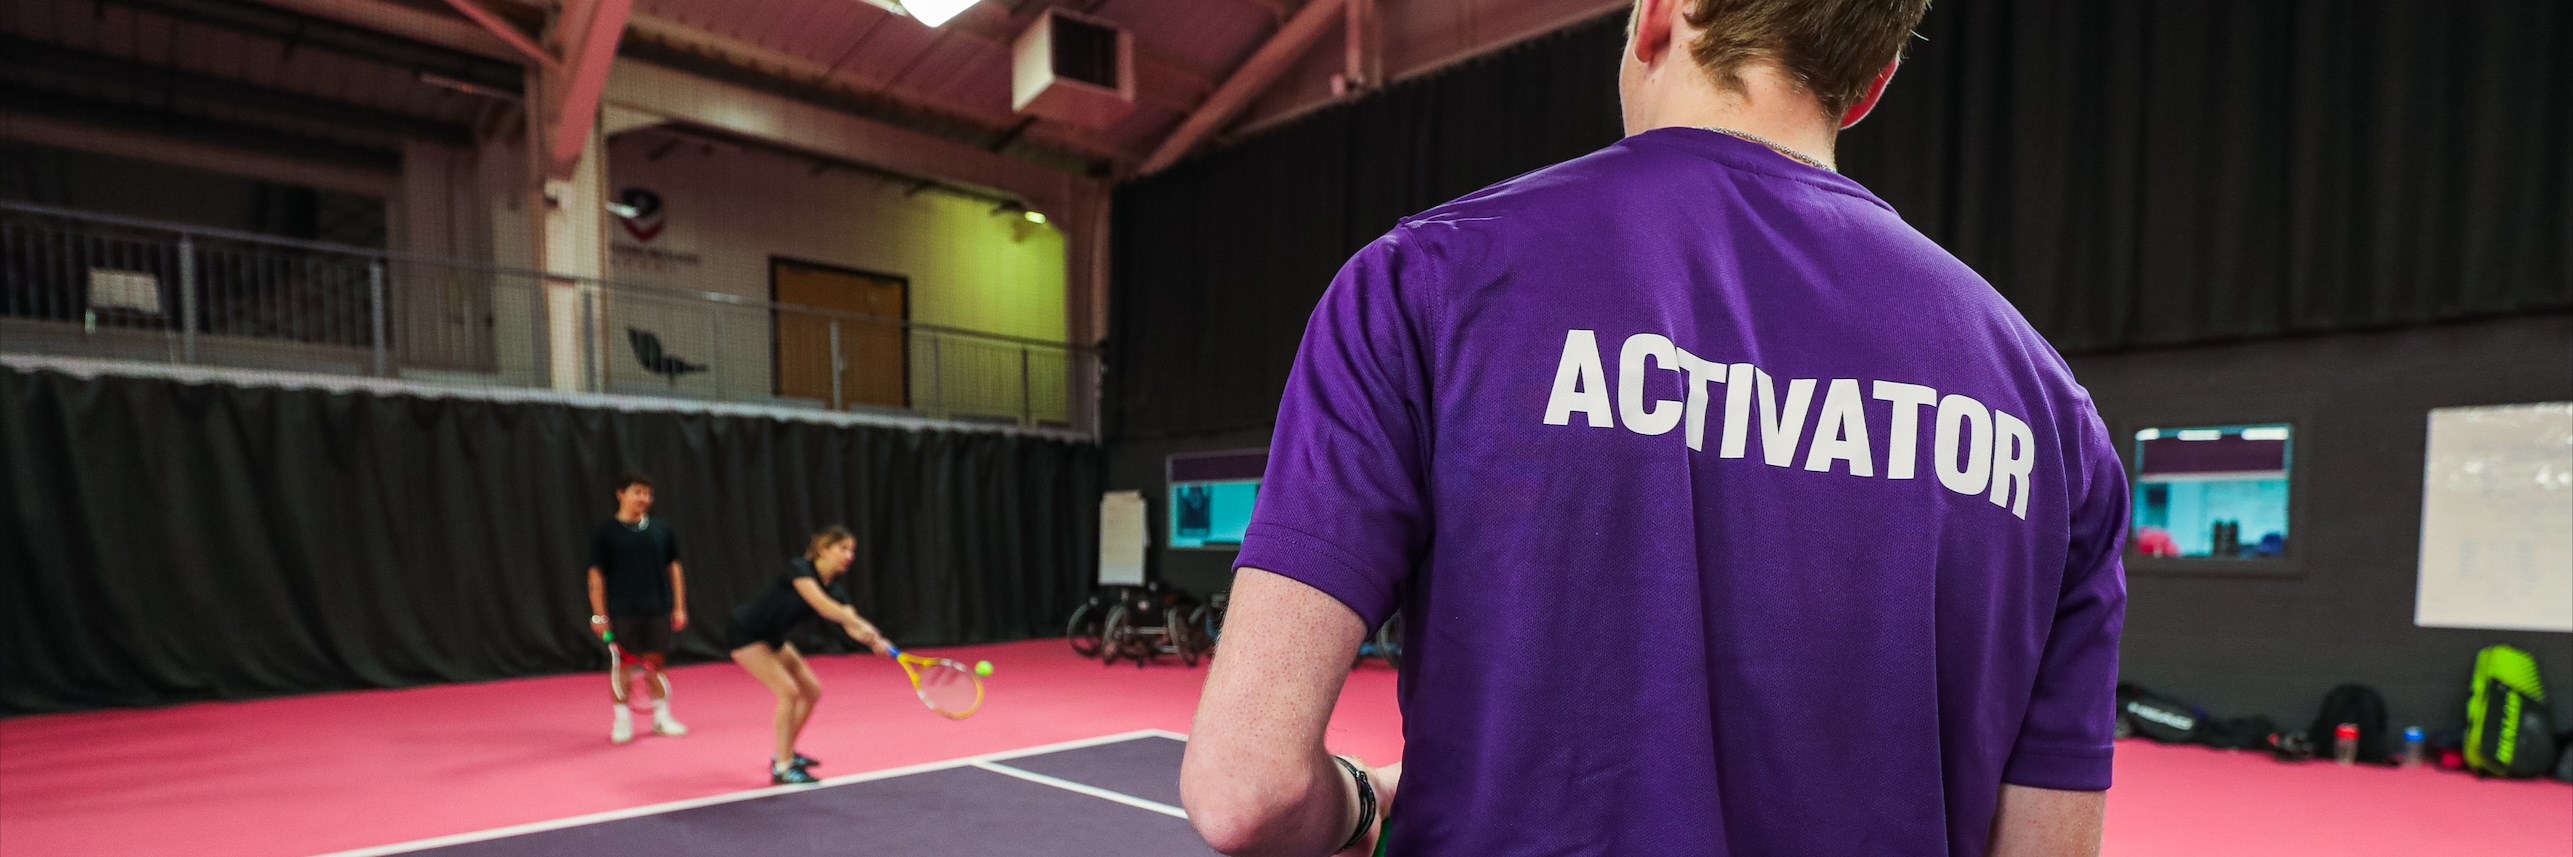 A University Activator coaching university tennis players on an indoor court